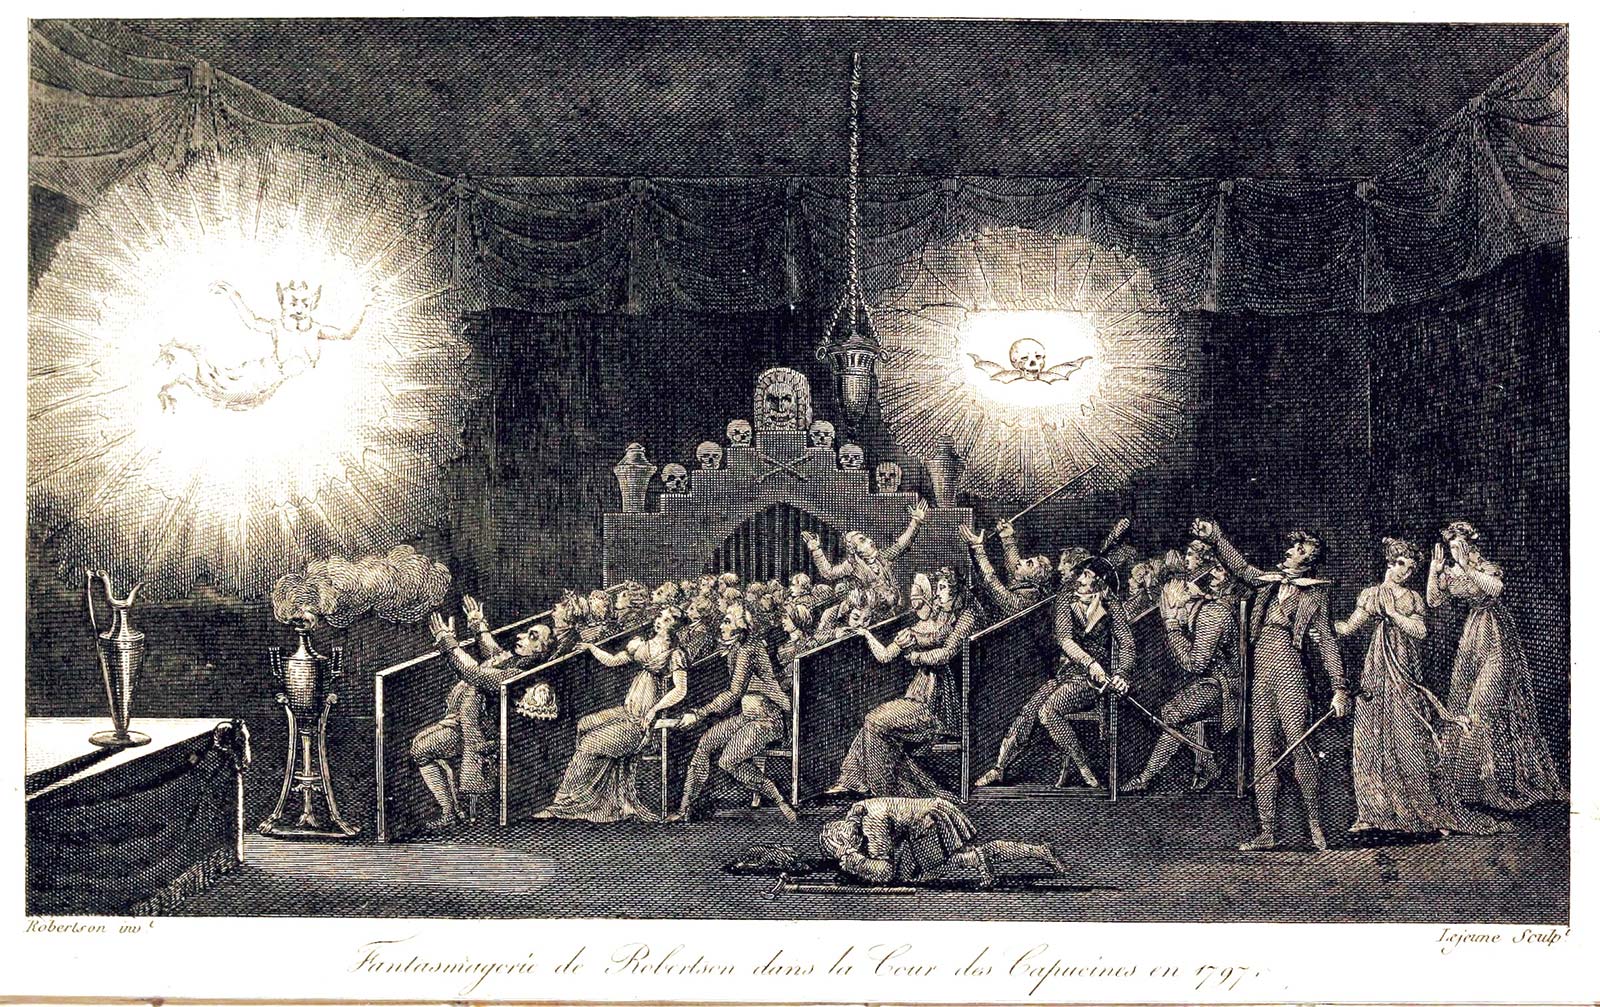 An 1831 engraving depicting phantasmagoria staged by Robertson at the Cour des Capucines in Paris in 1797.